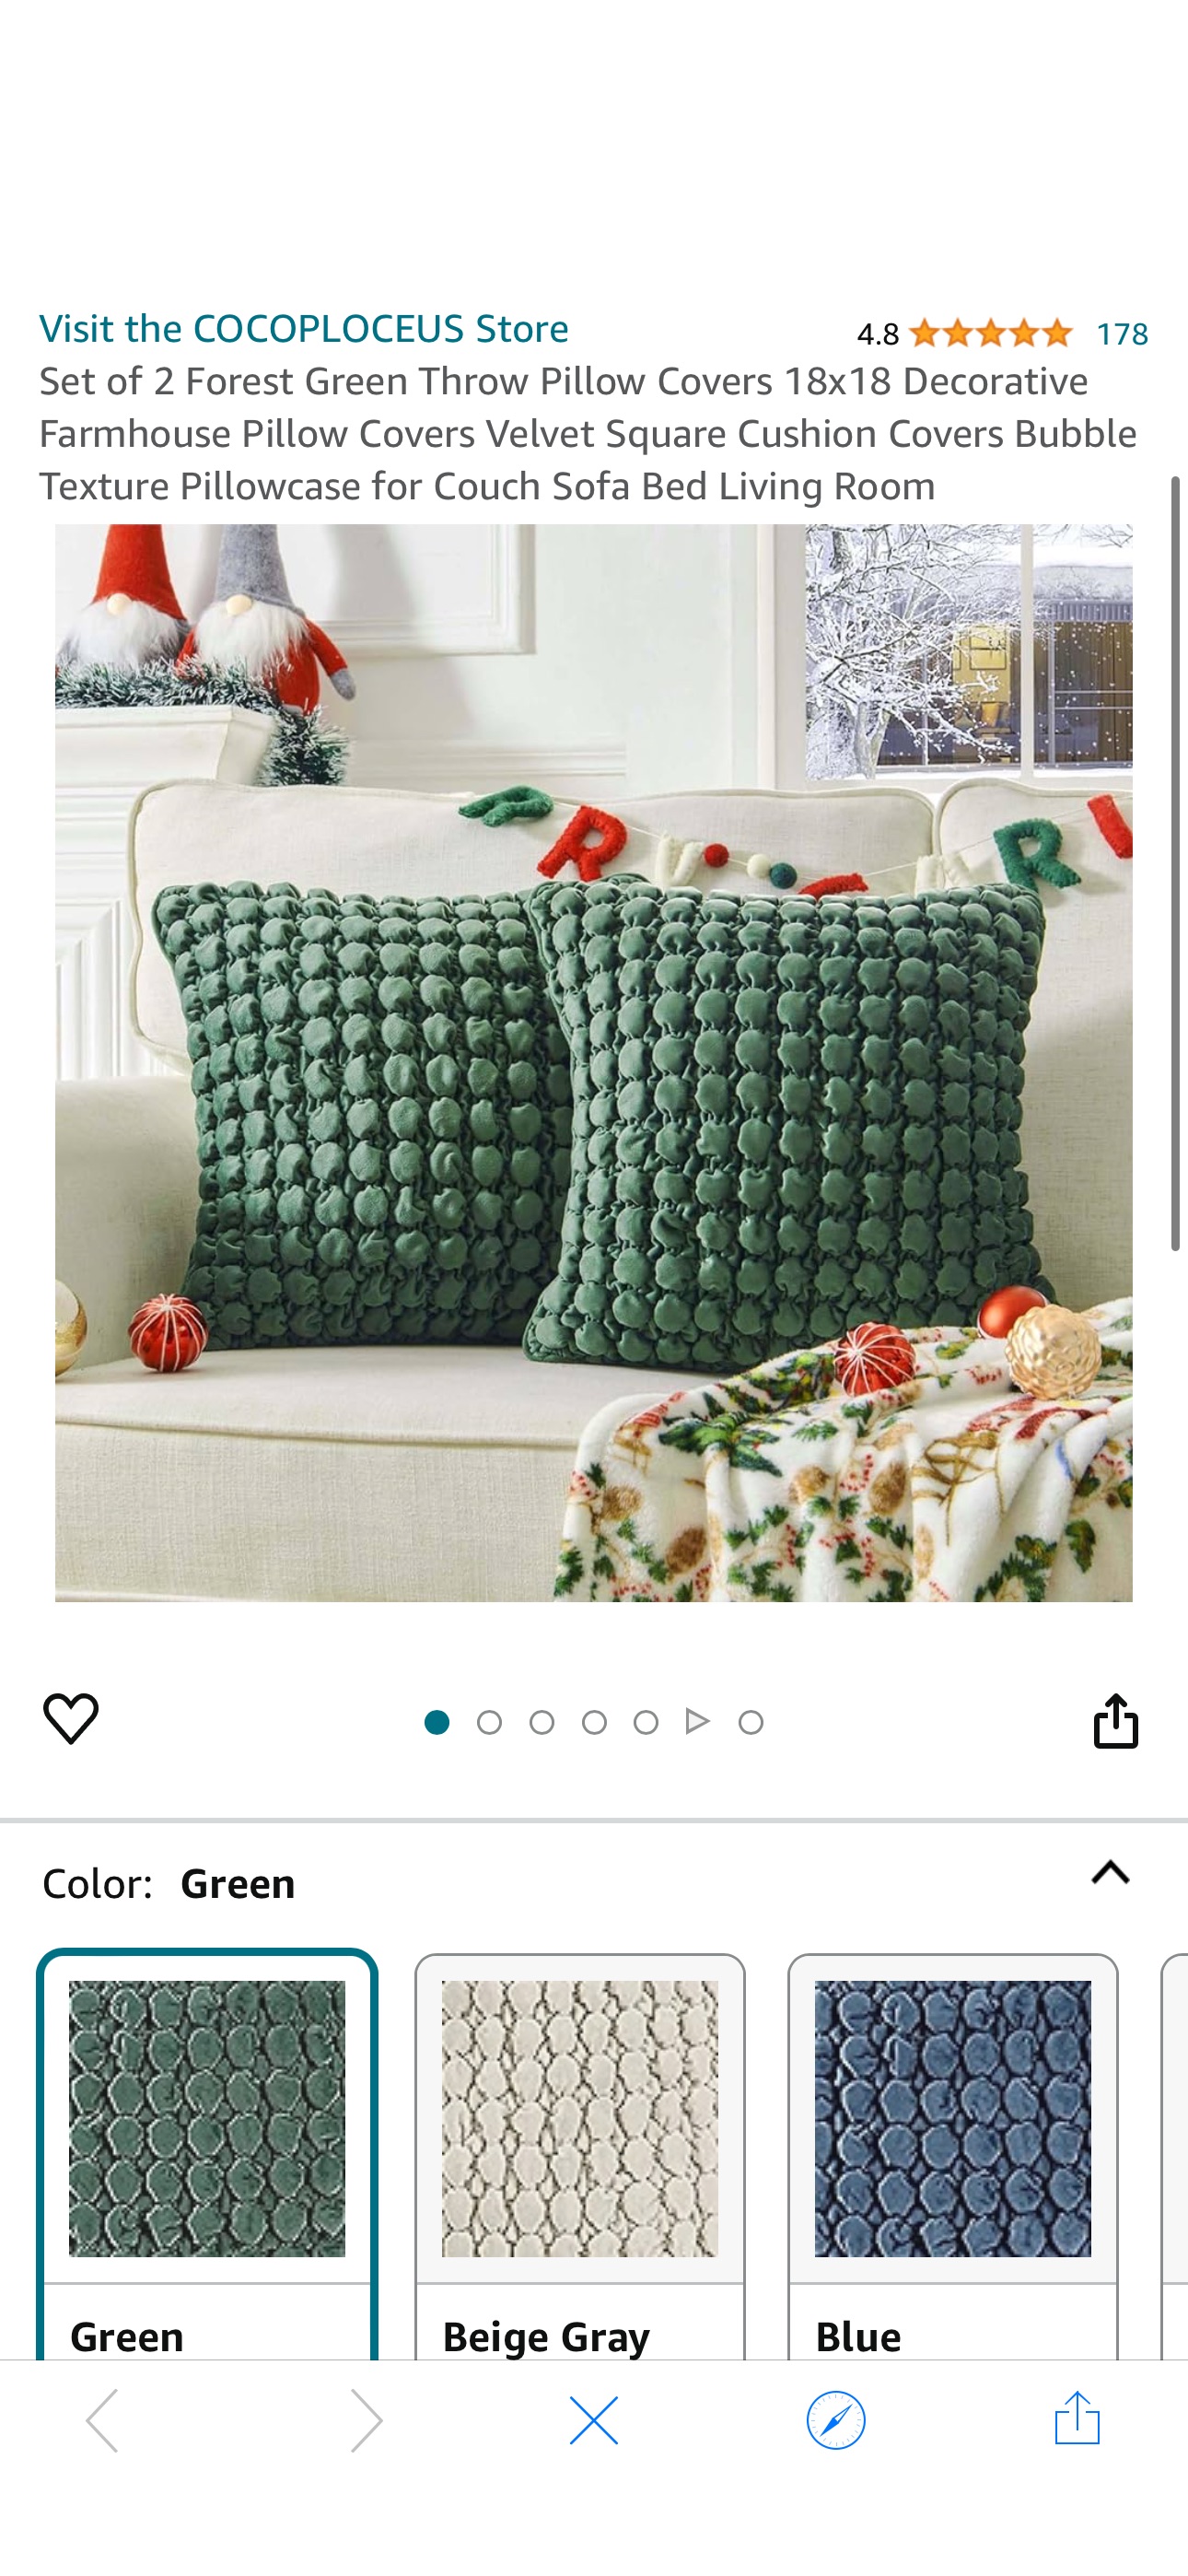 Amazon.com: COCOPLOCEUS Set of 2 Forest Green Throw Pillow Covers 18x18 Decorative Farmhouse Pillow Covers Velvet Square Cushion Covers Bubble Texture Pillowcase for Couch Sofa Bed Living Room : Home 